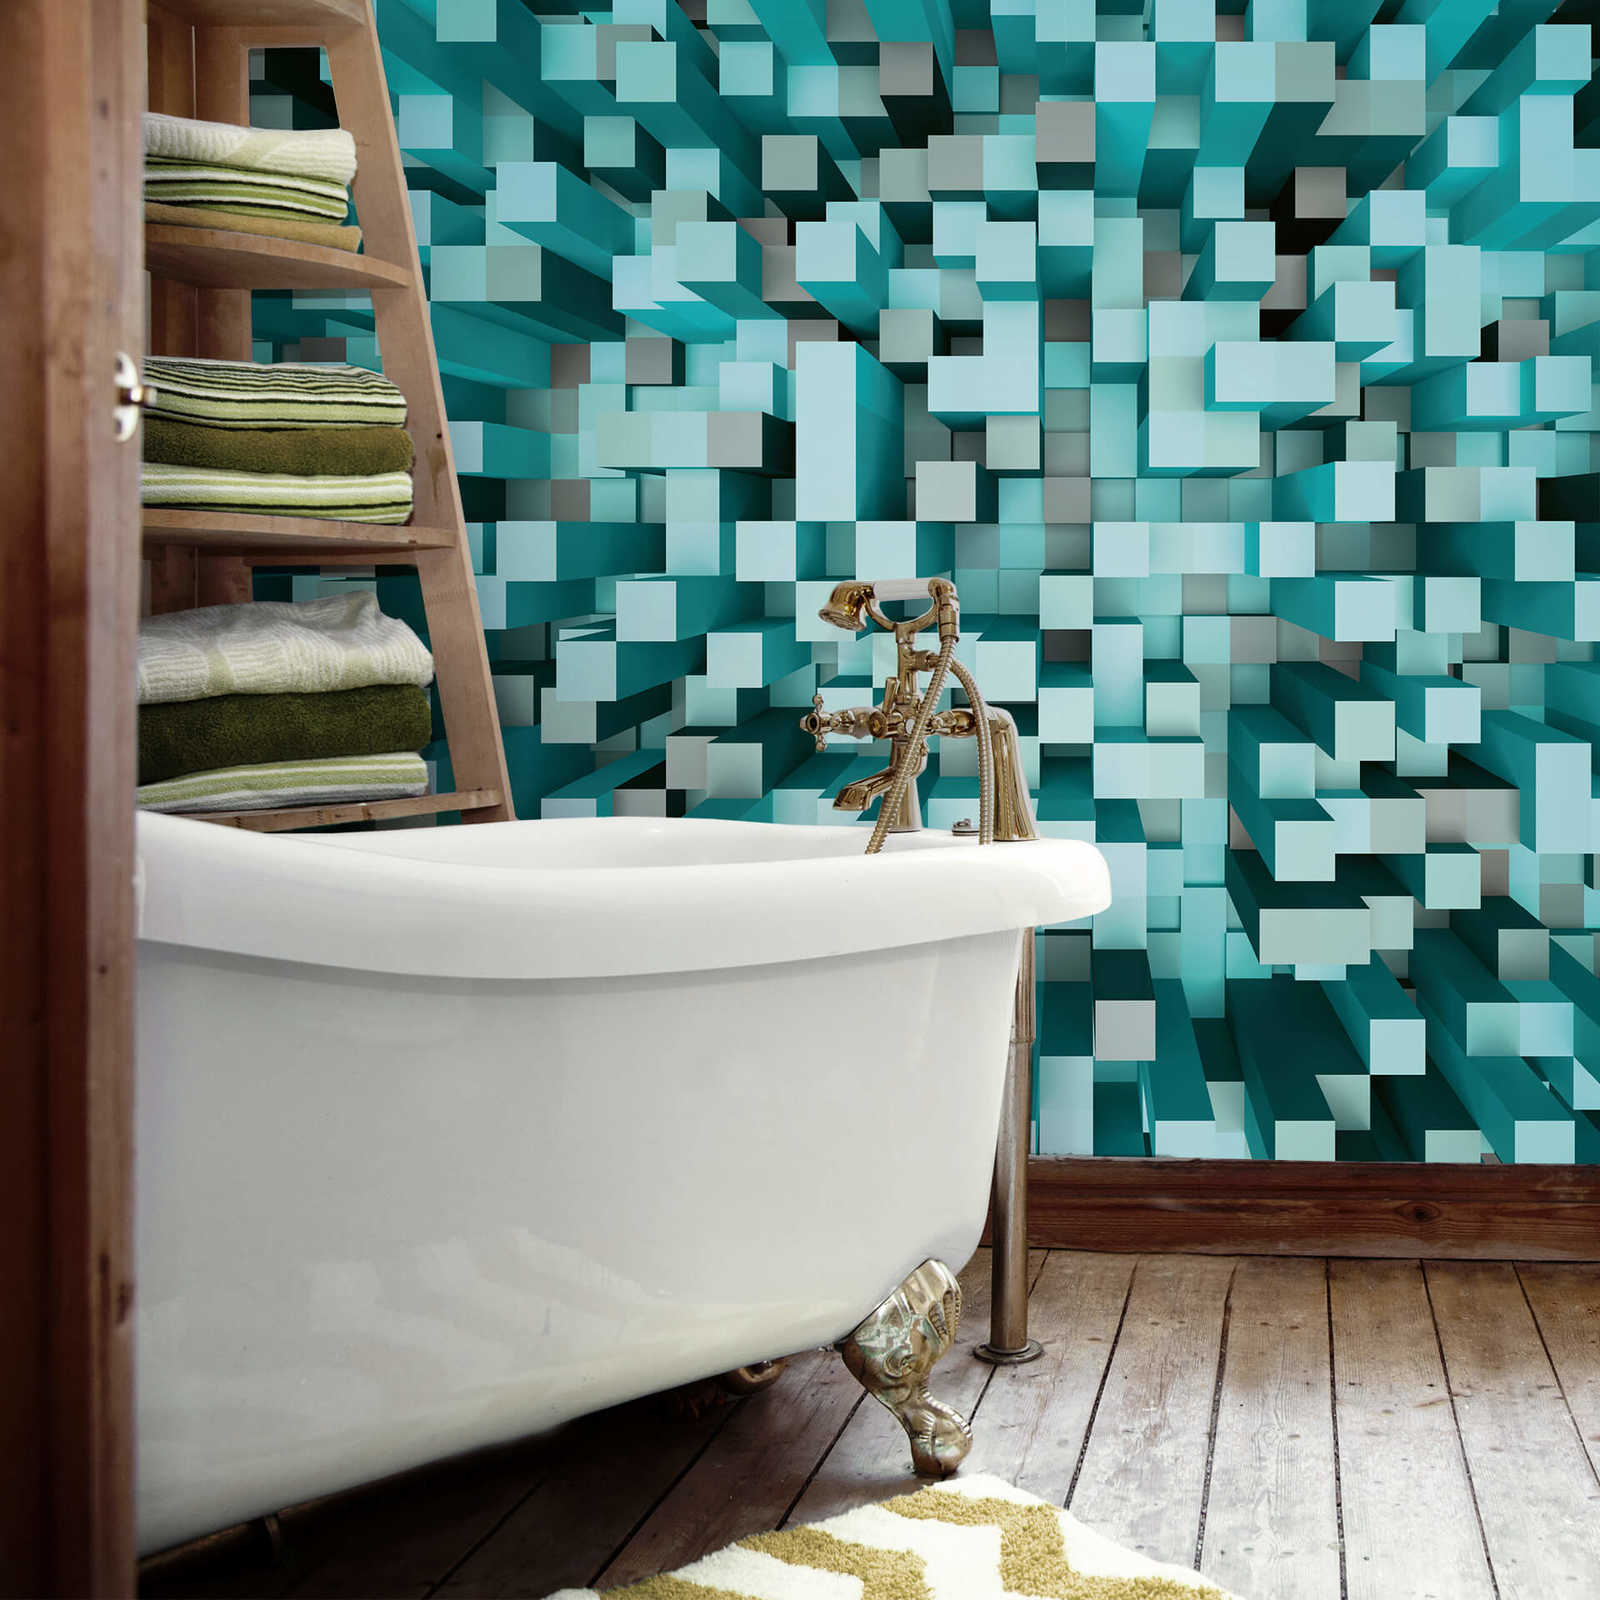             3D Pixel style square pattern mural - Turquoise
        